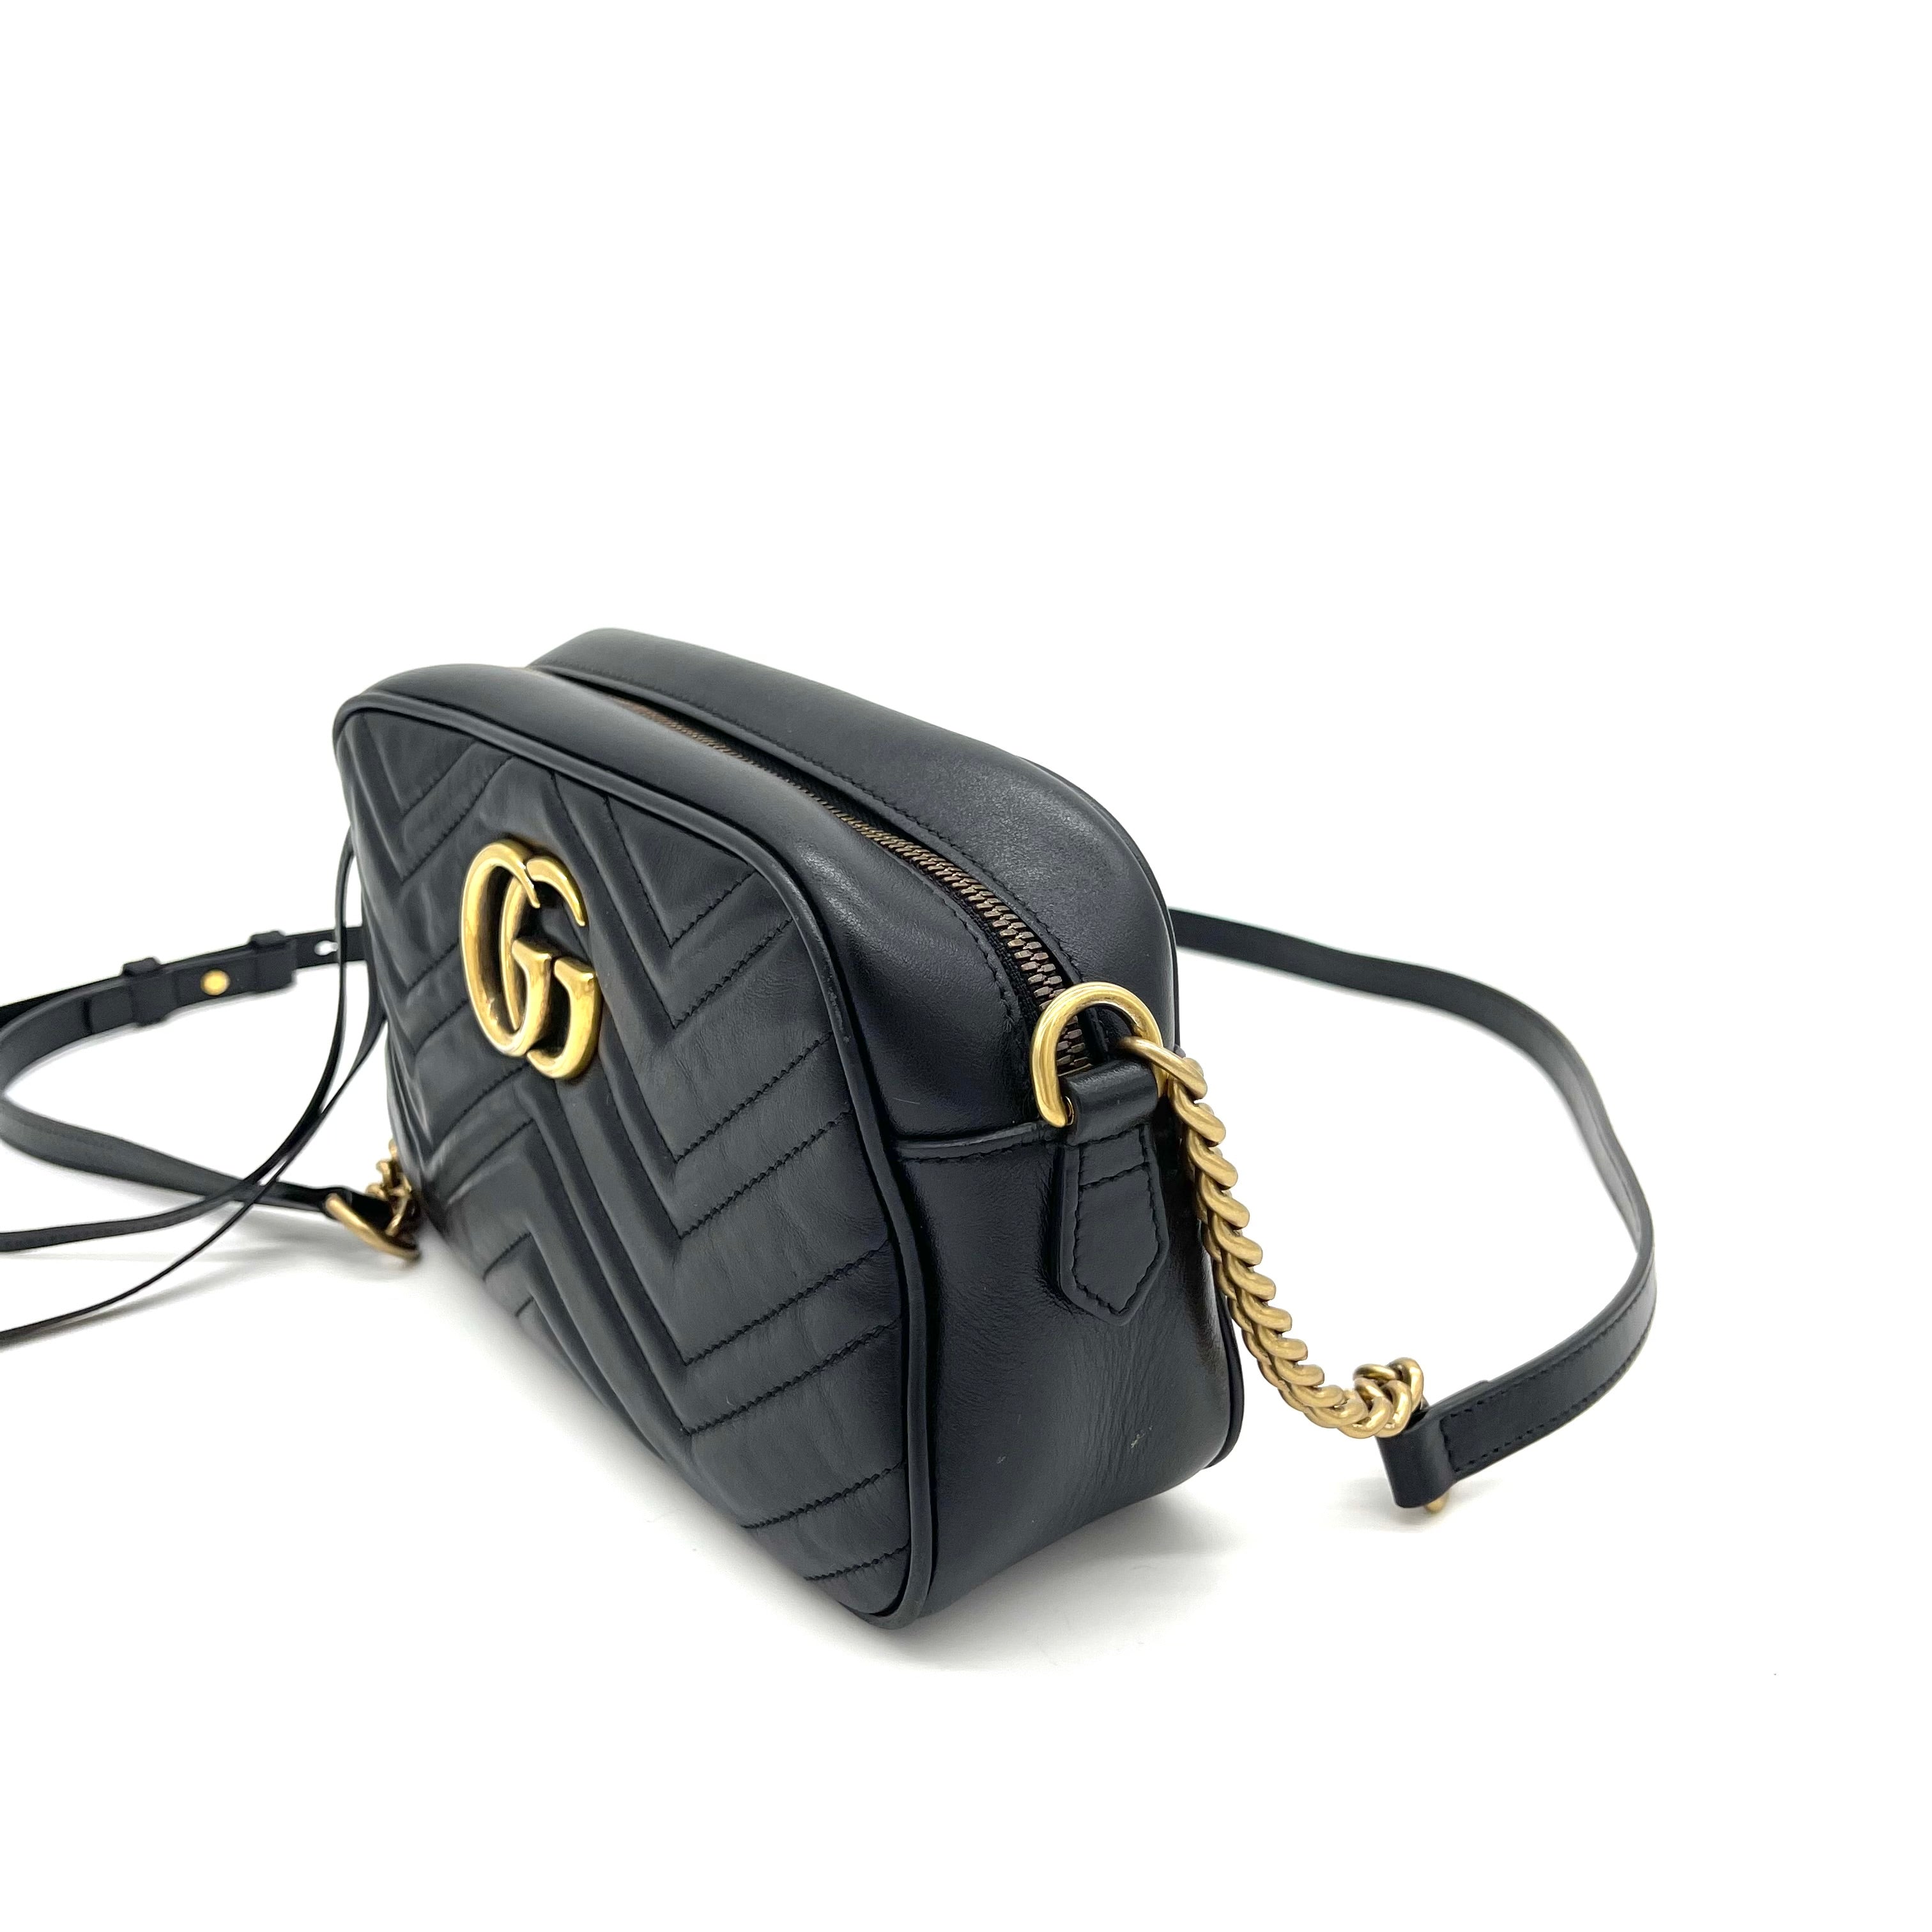 Gucci GG Marmont Small Shoulder Bag for Women